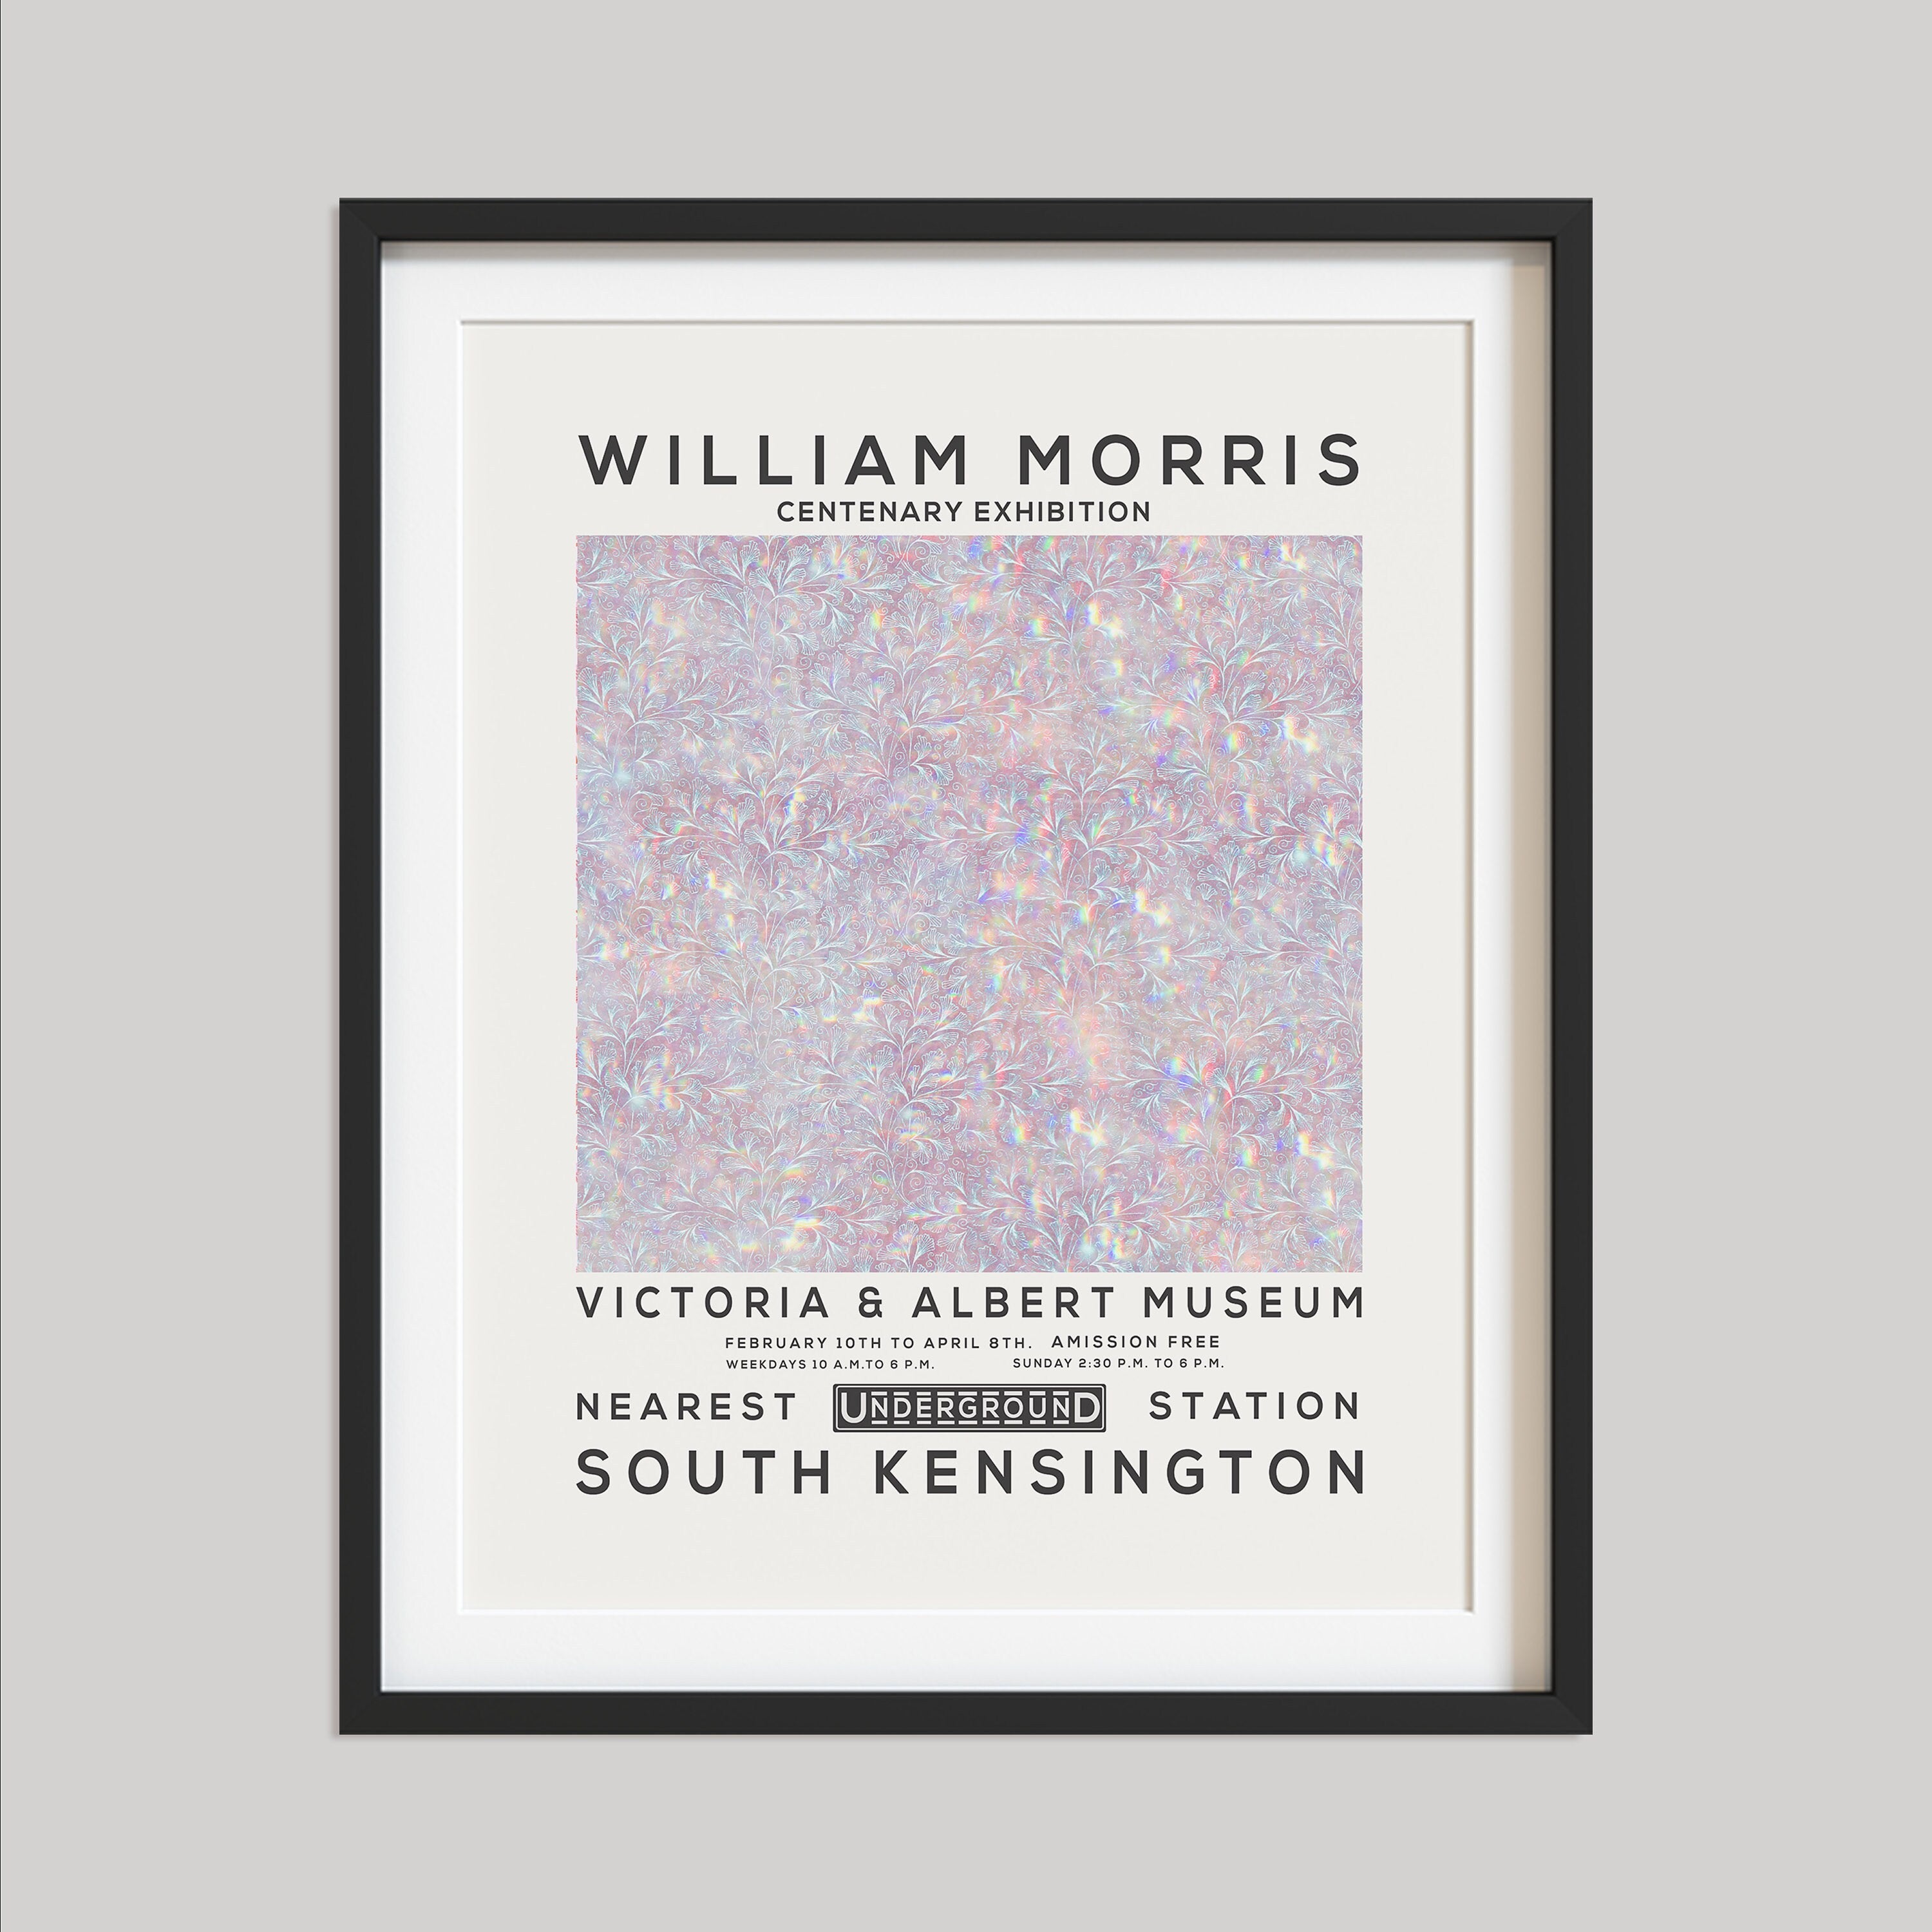 William Morris Poster, Vintage Wall Decor, Exhibition Poster, Floral Wall Art, Gallery Poster, Home Decor, Museum Poster